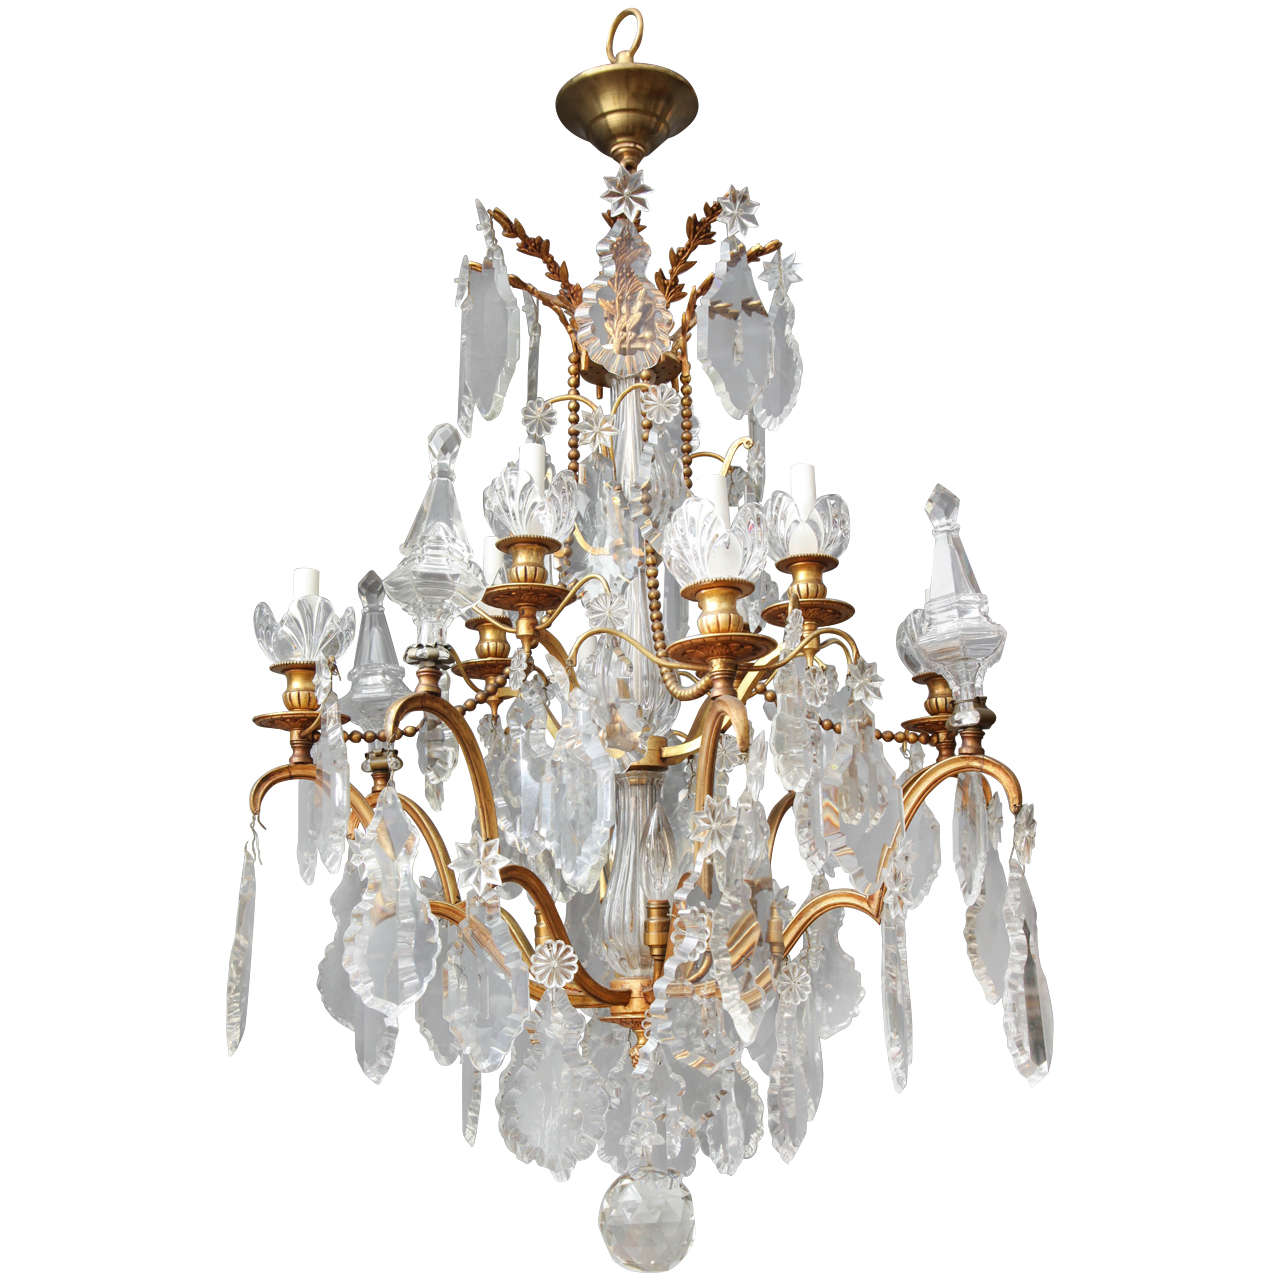 Eight Light French Louis XVI Style Chandelier